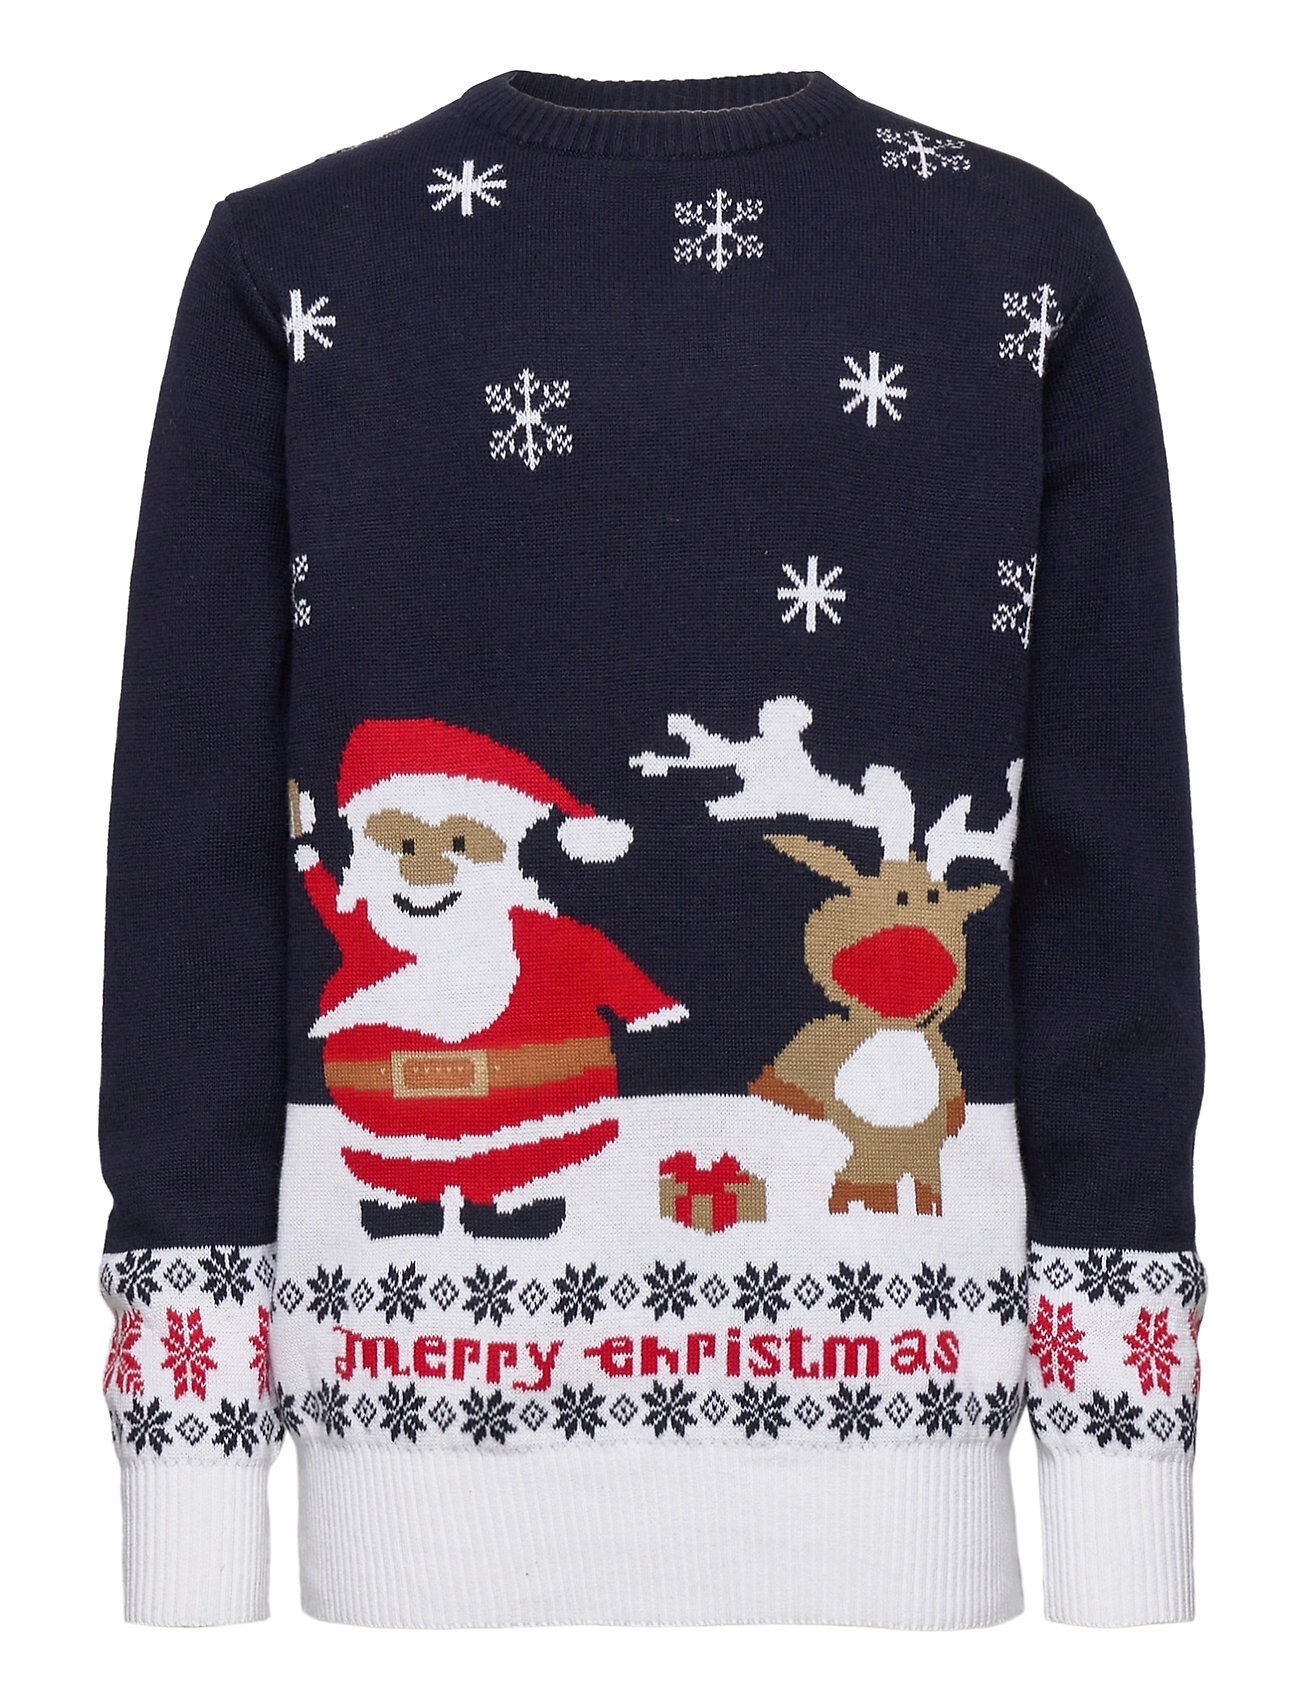 Christmas Sweats The Ultimative Christmas Sweater Pullover Blå Christmas Sweats